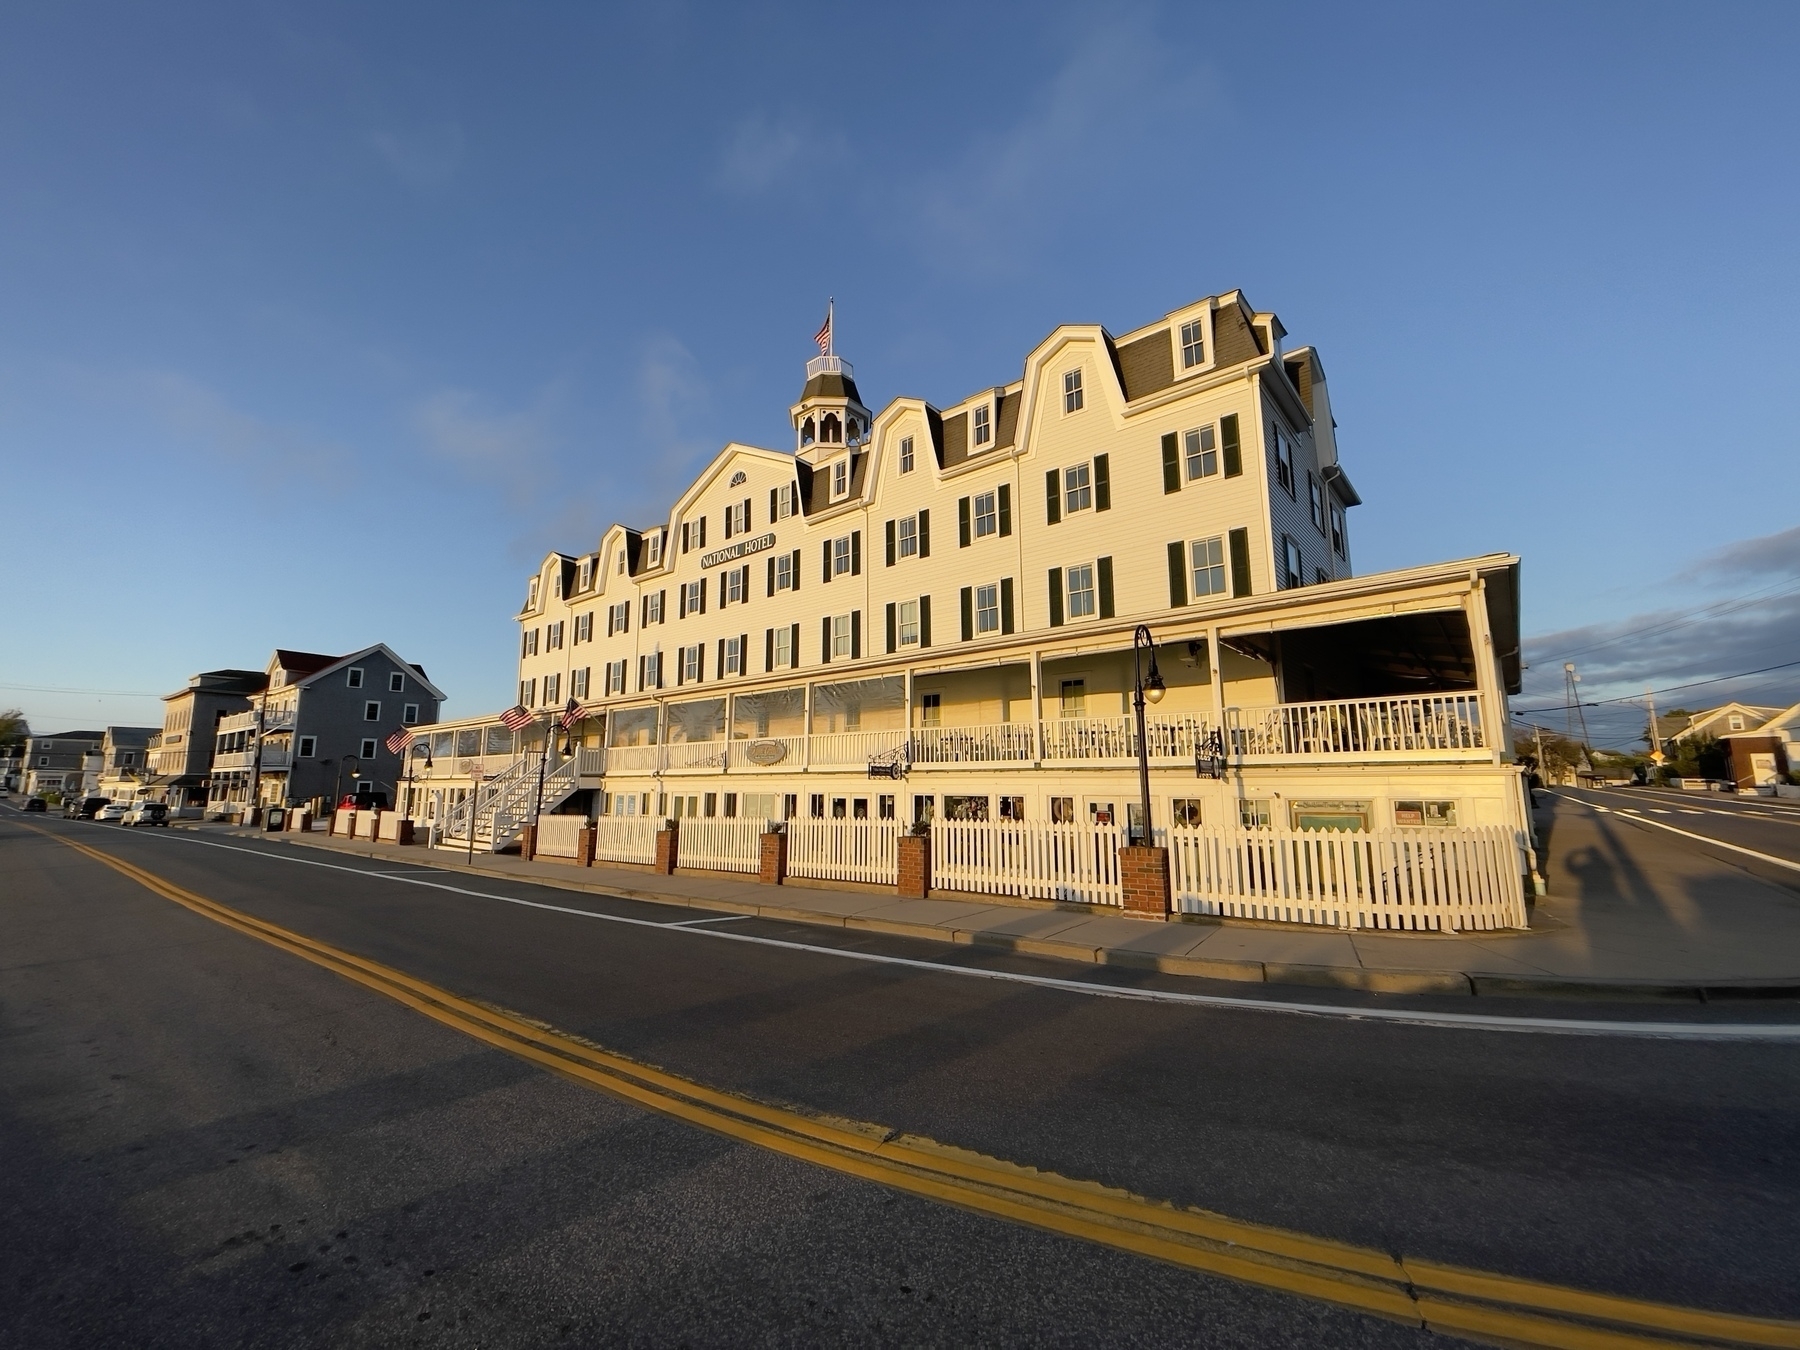 The National Hotel building on Block Island, in the early morning sun.